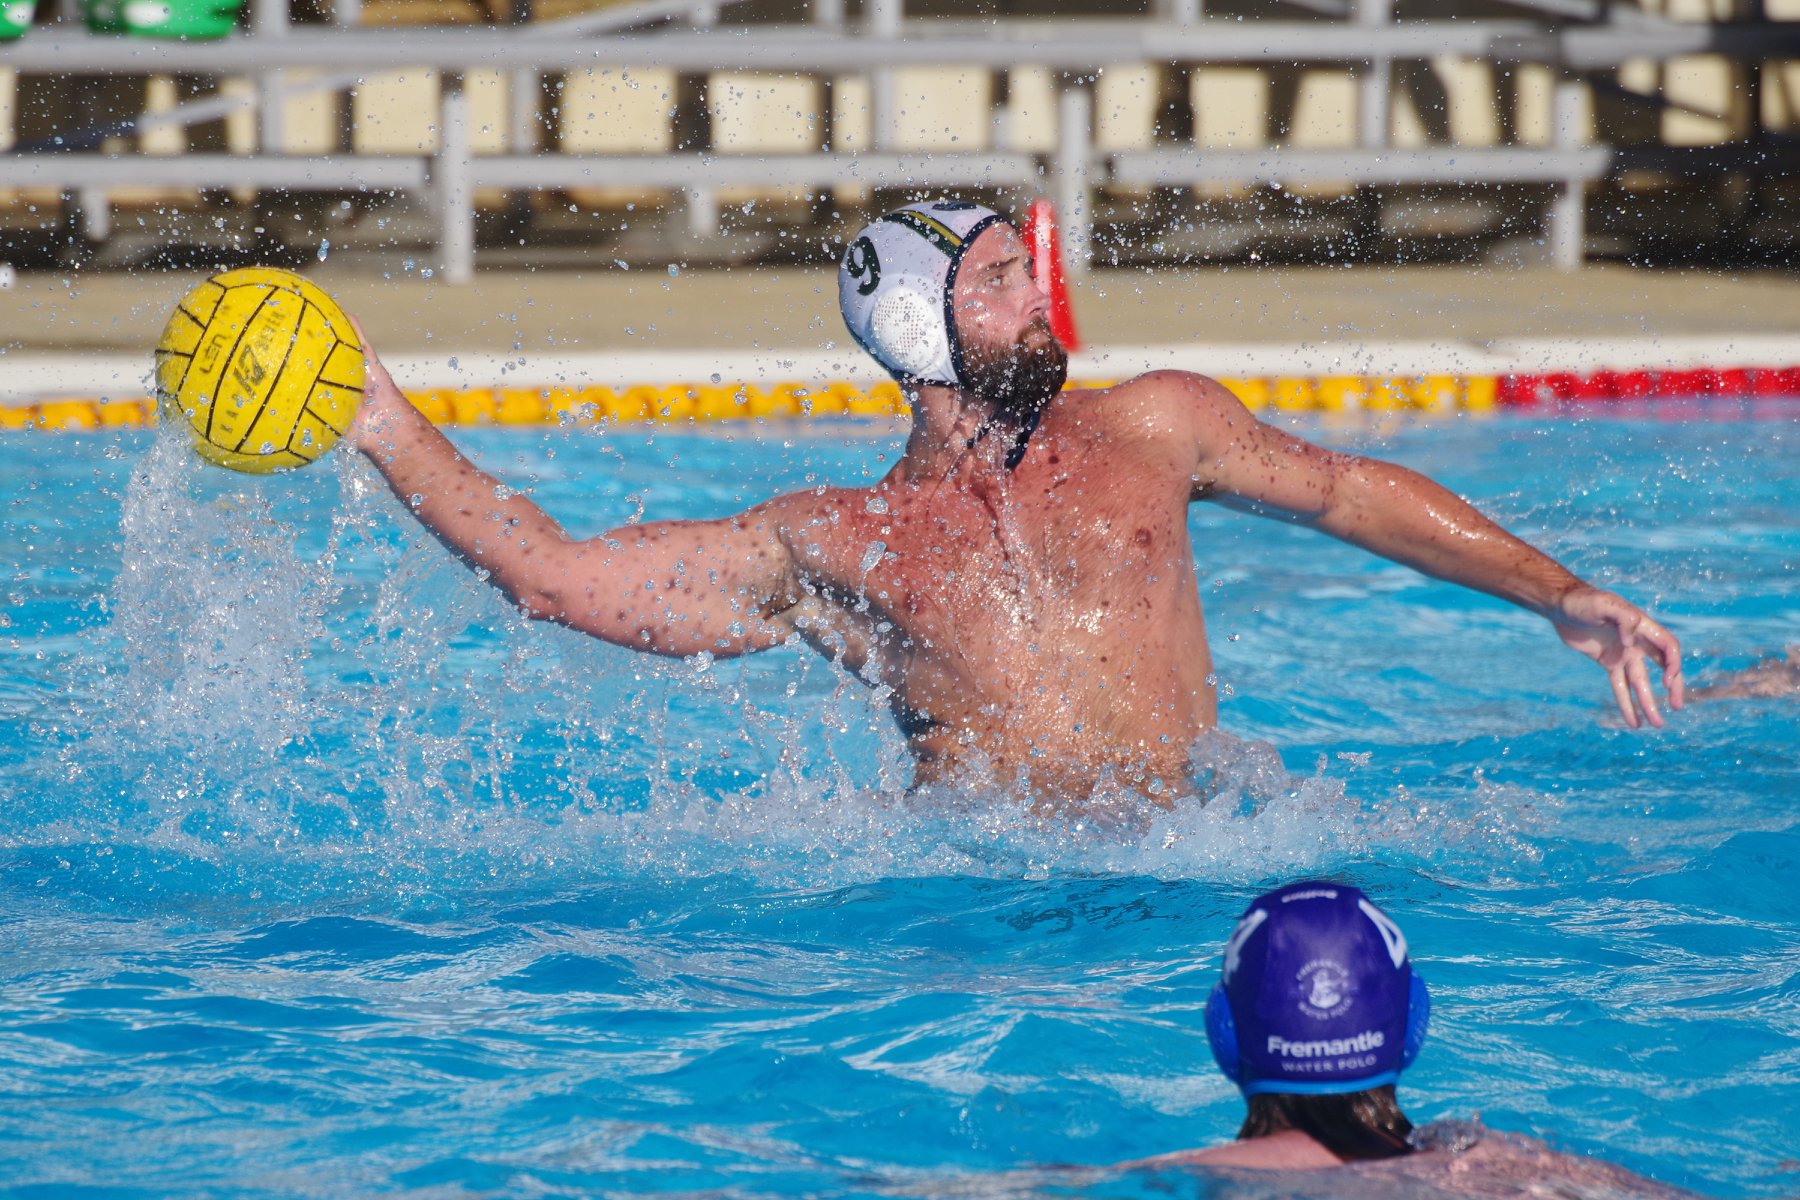 A UWA Water Polo Club member is preparing to throw a yellow water polo ball